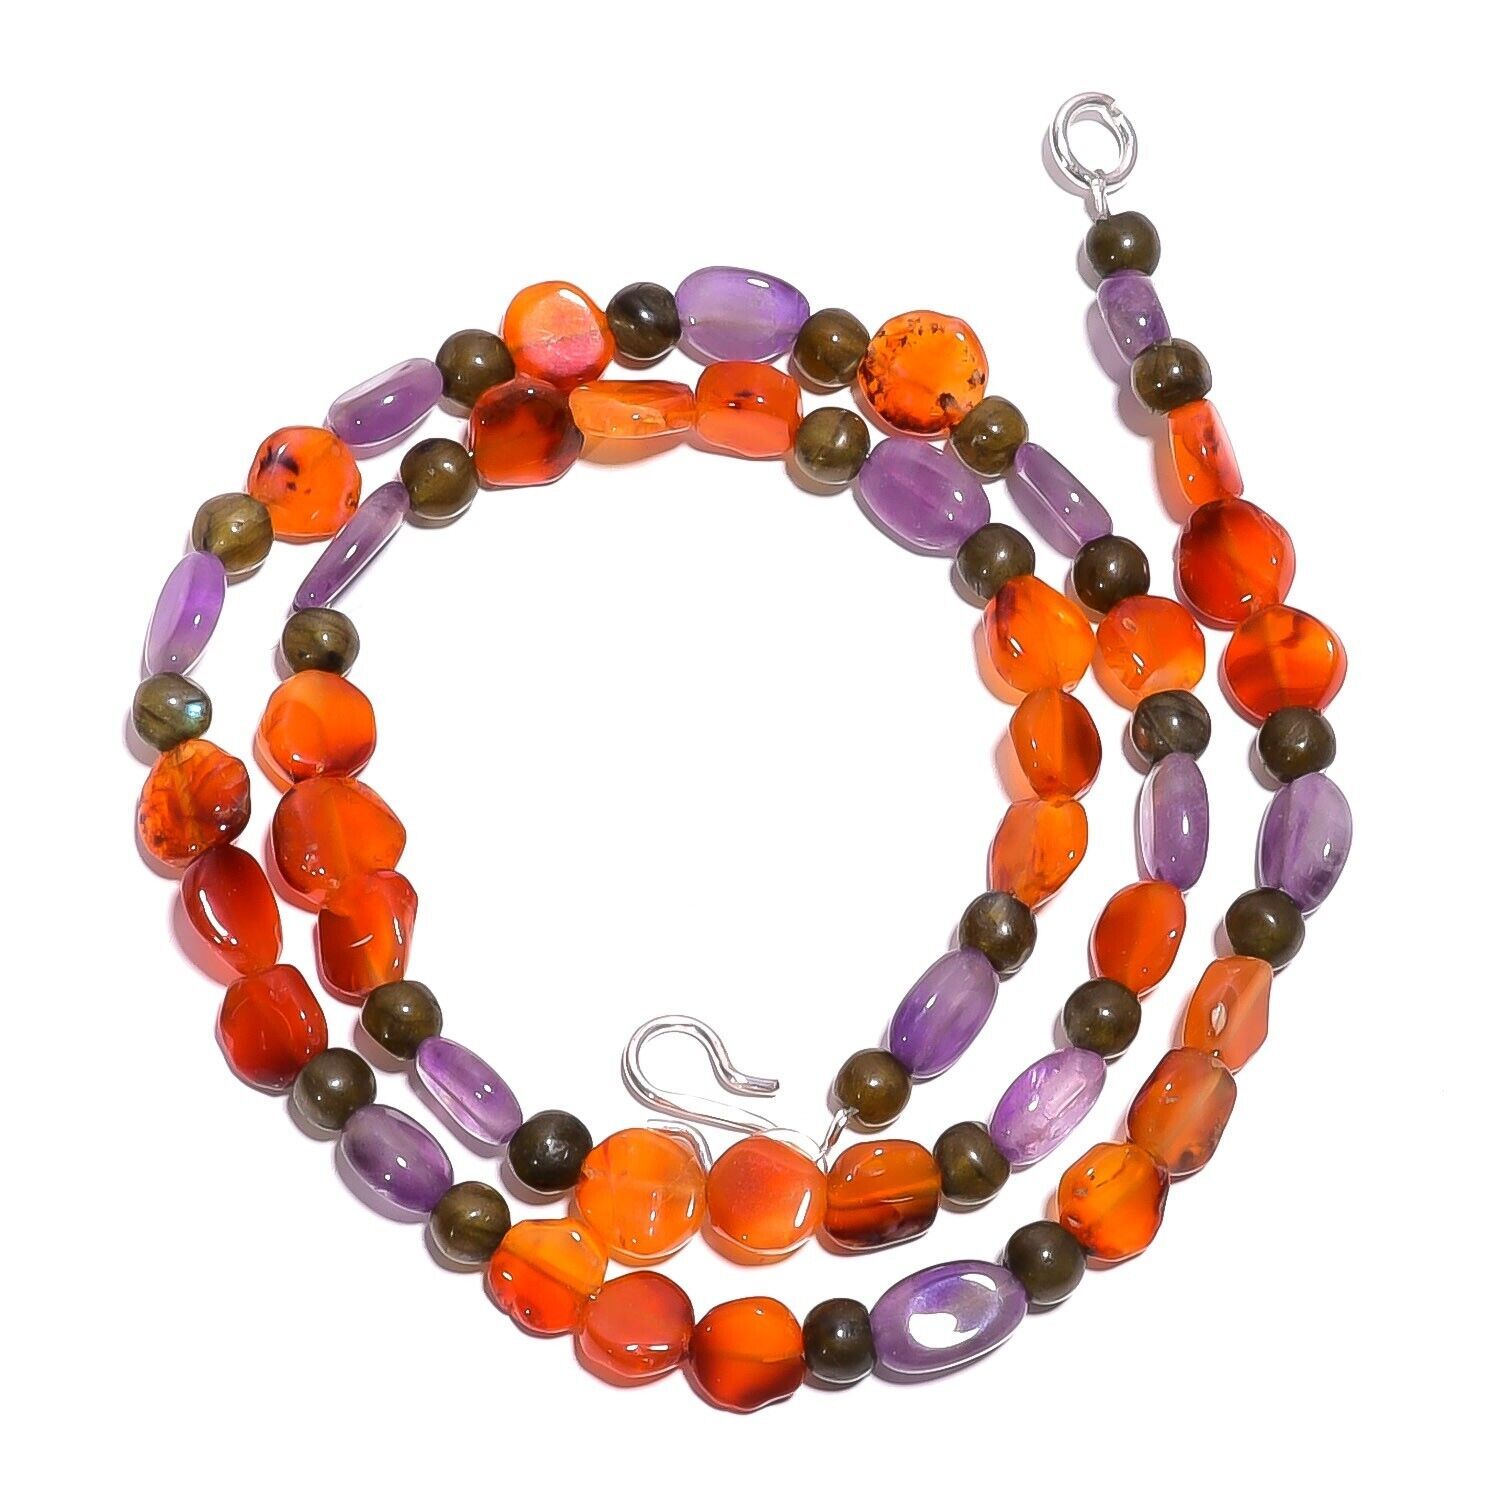 Primary image for Natural Carnelian Amethyst Labradorite Gemstone Smooth Beads Necklace 17" UB4955